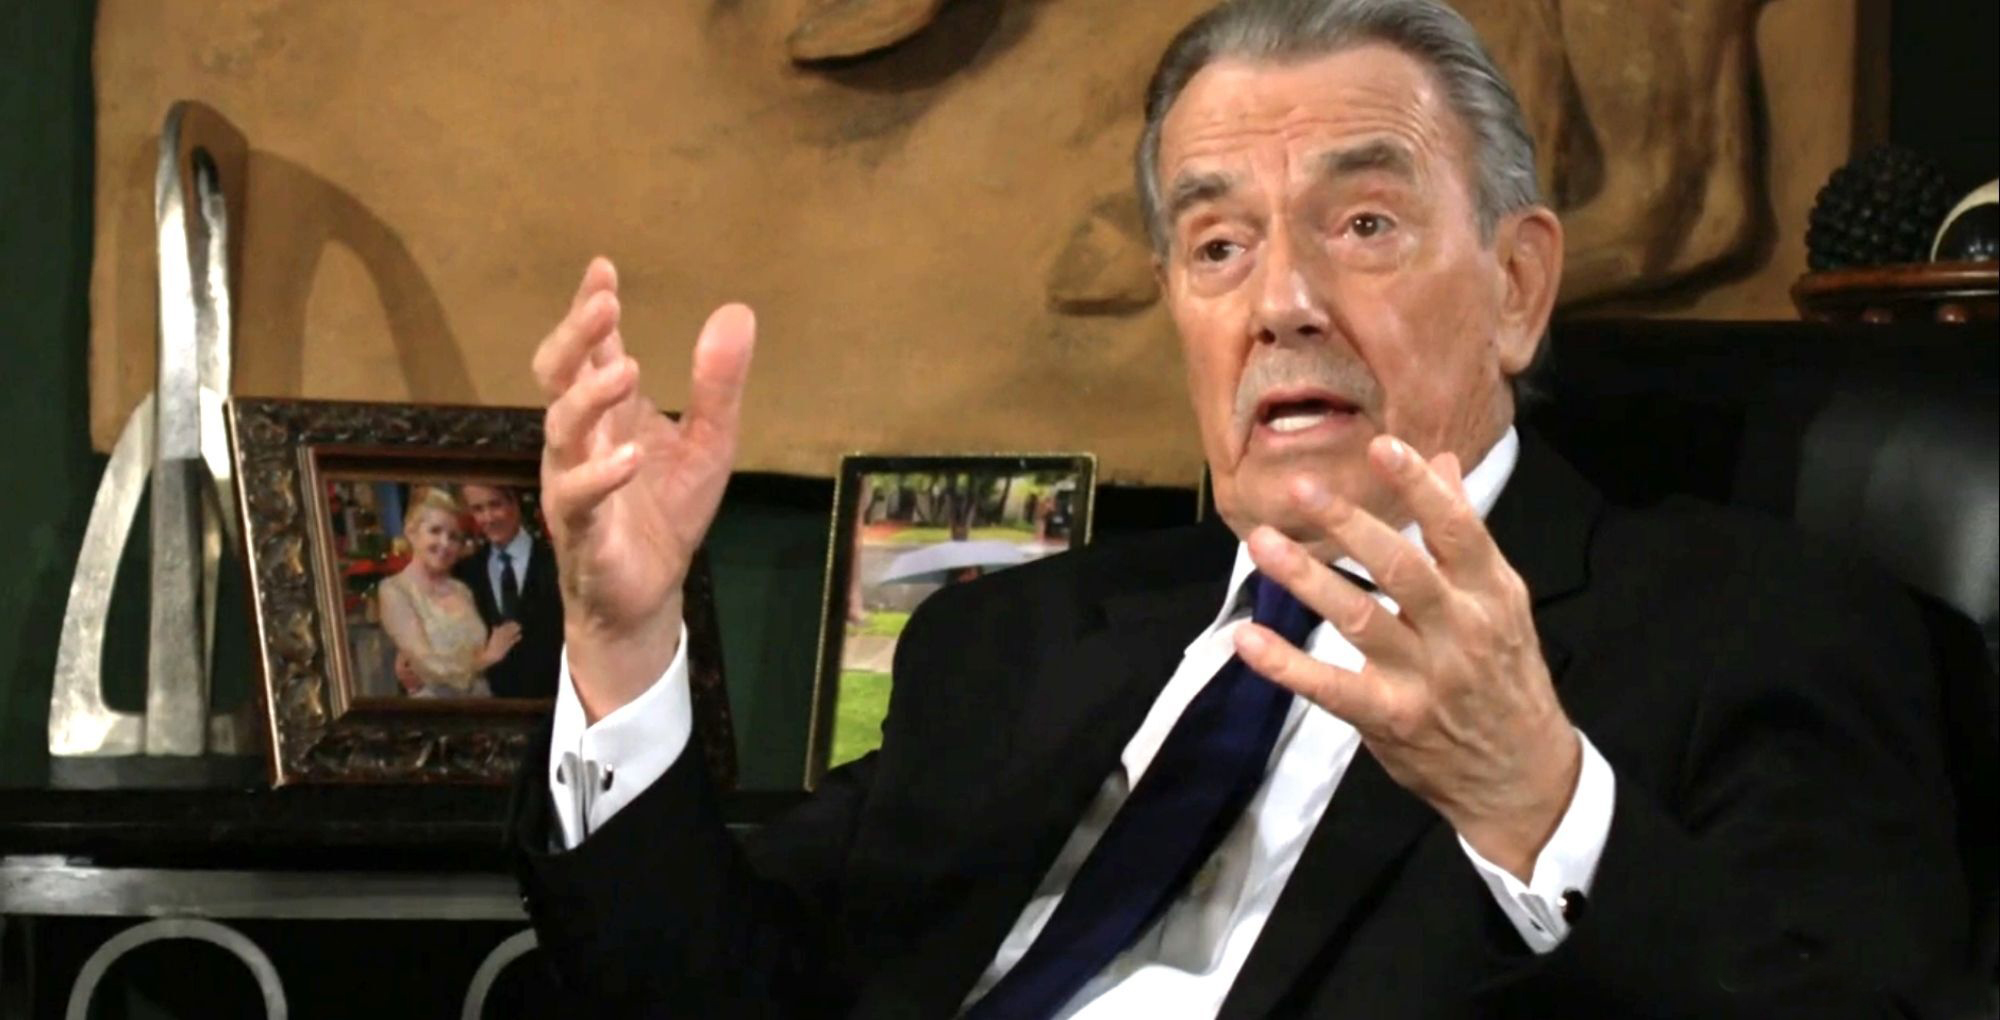 victor newman double image on the young and the restless recap for april 20, 2023.